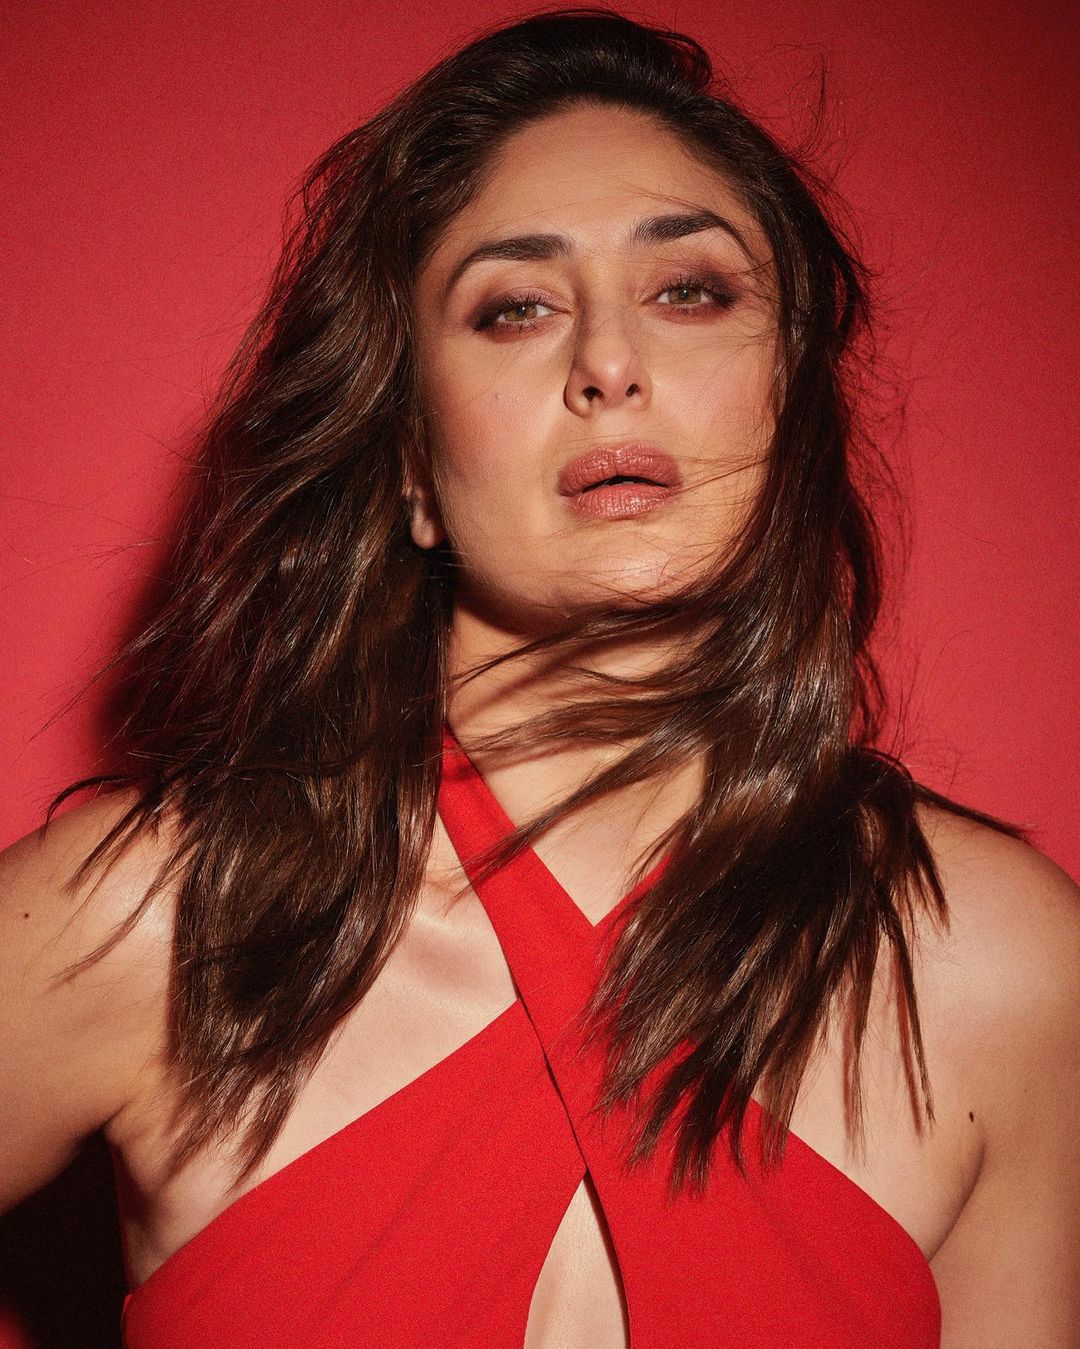 Kareena Kapoor Khan oozes sexiness in the halterneck outfit